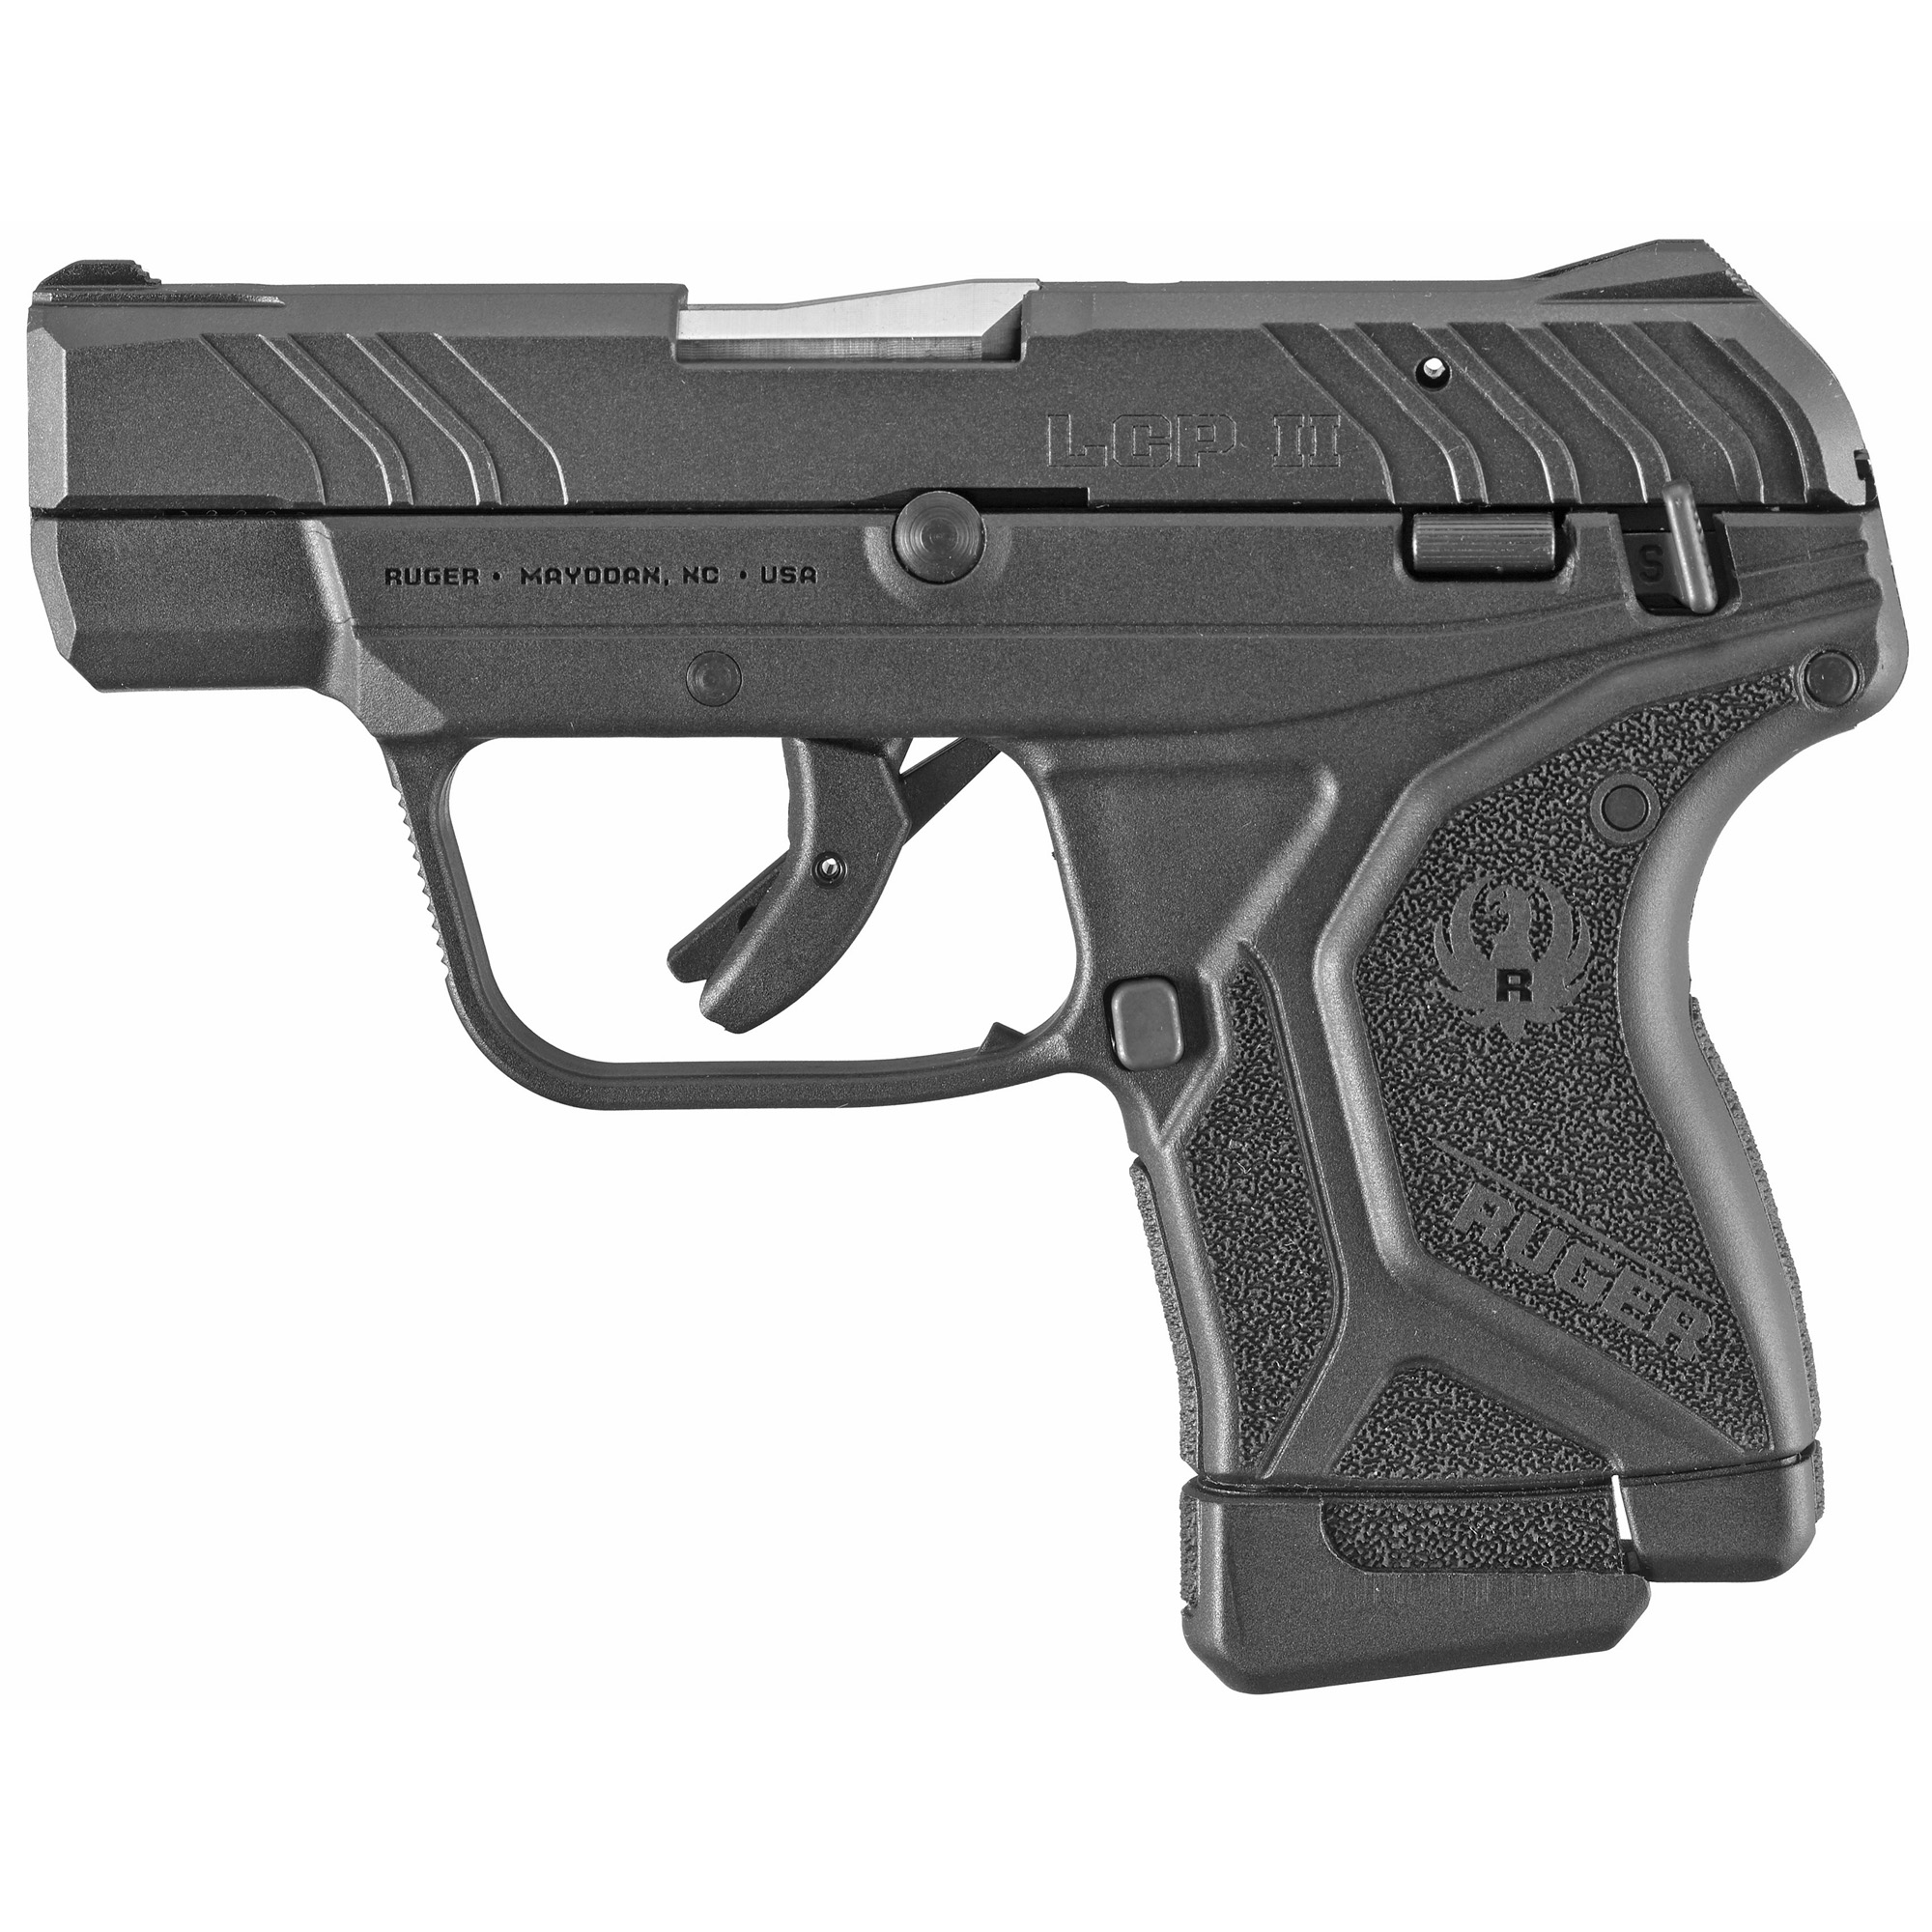 Ruger, LCP II, Double Action Only, Semi-automatic, Polymer Frame Pistol, Sub-Compact, 22LR, 2.75" Barrel, Stainless Steel Barrel, Black Oxide Finish, Black, Integral Fixed Sights, Manual Safety, 10 Rounds, 1 Magazine, Right Hand